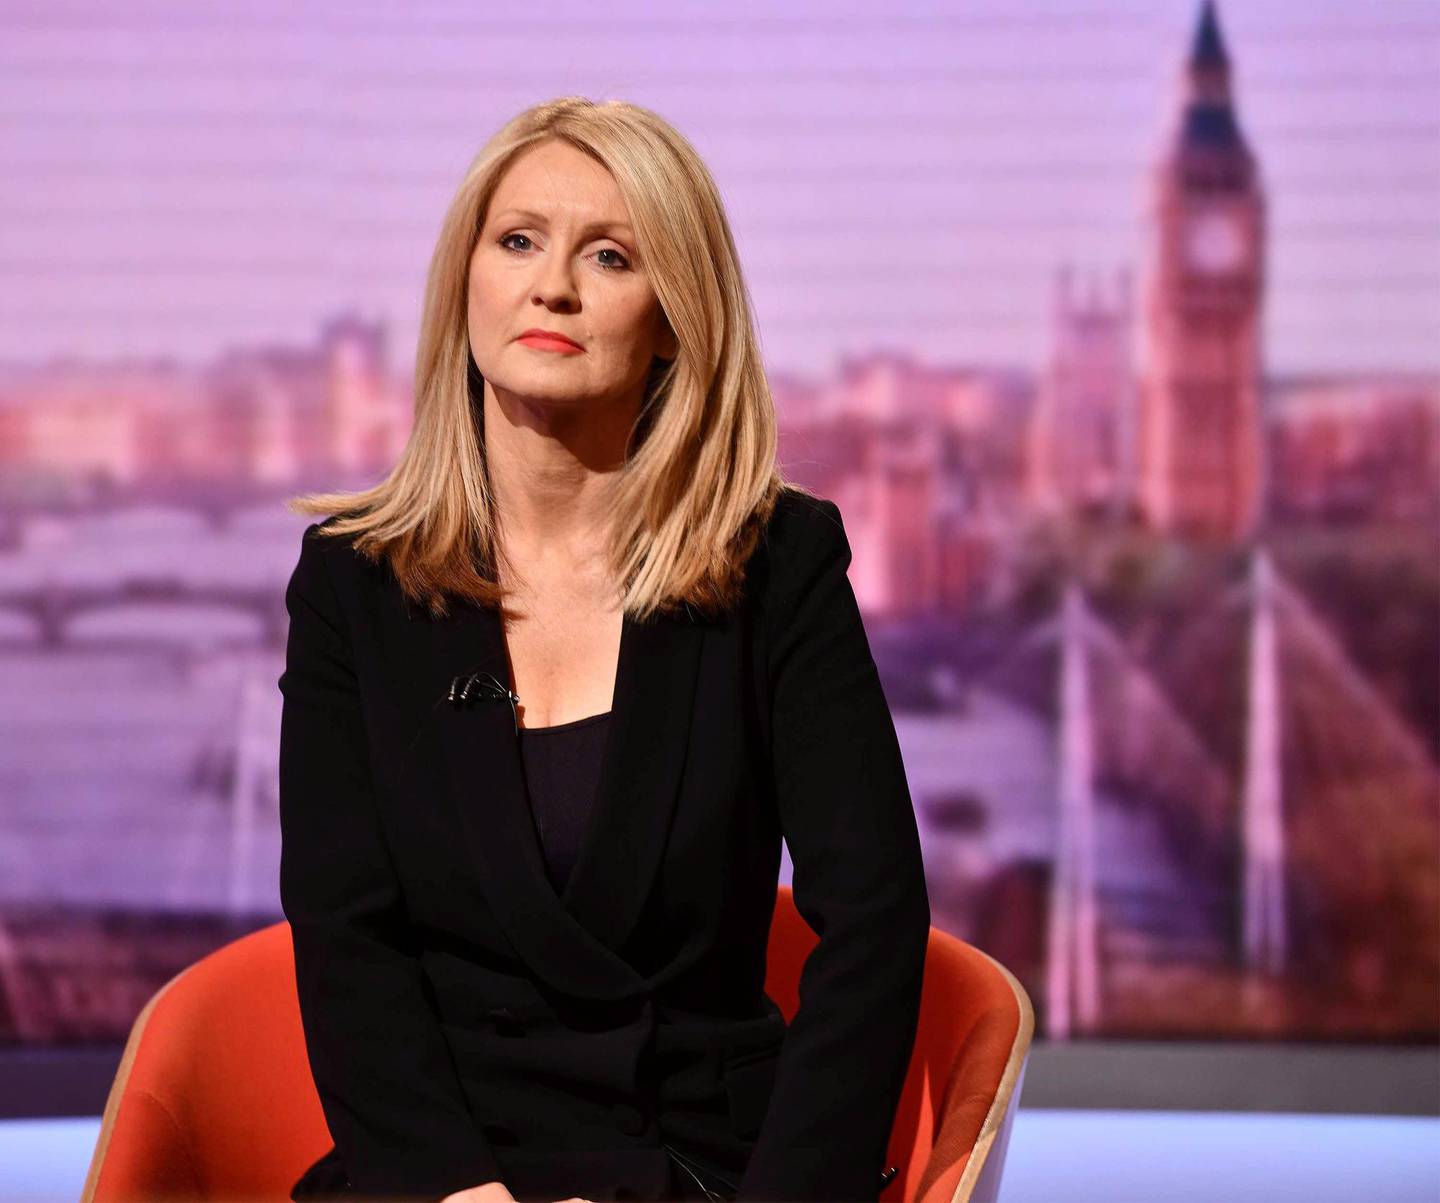 Britain's prime ministerial candidate Esther McVey appears on BBC TV's The Andrew Marr Show in London, Britain June 9, 2019. Jeff Overs/BBC/Handout via REUTERS ATTENTION EDITORS - THIS IMAGE HAS BEEN SUPPLIED BY A THIRD PARTY. NO RESALES. NO ARCHIVES. NOT FOR USE MORE THAN 21 DAYS AFTER ISSUE.